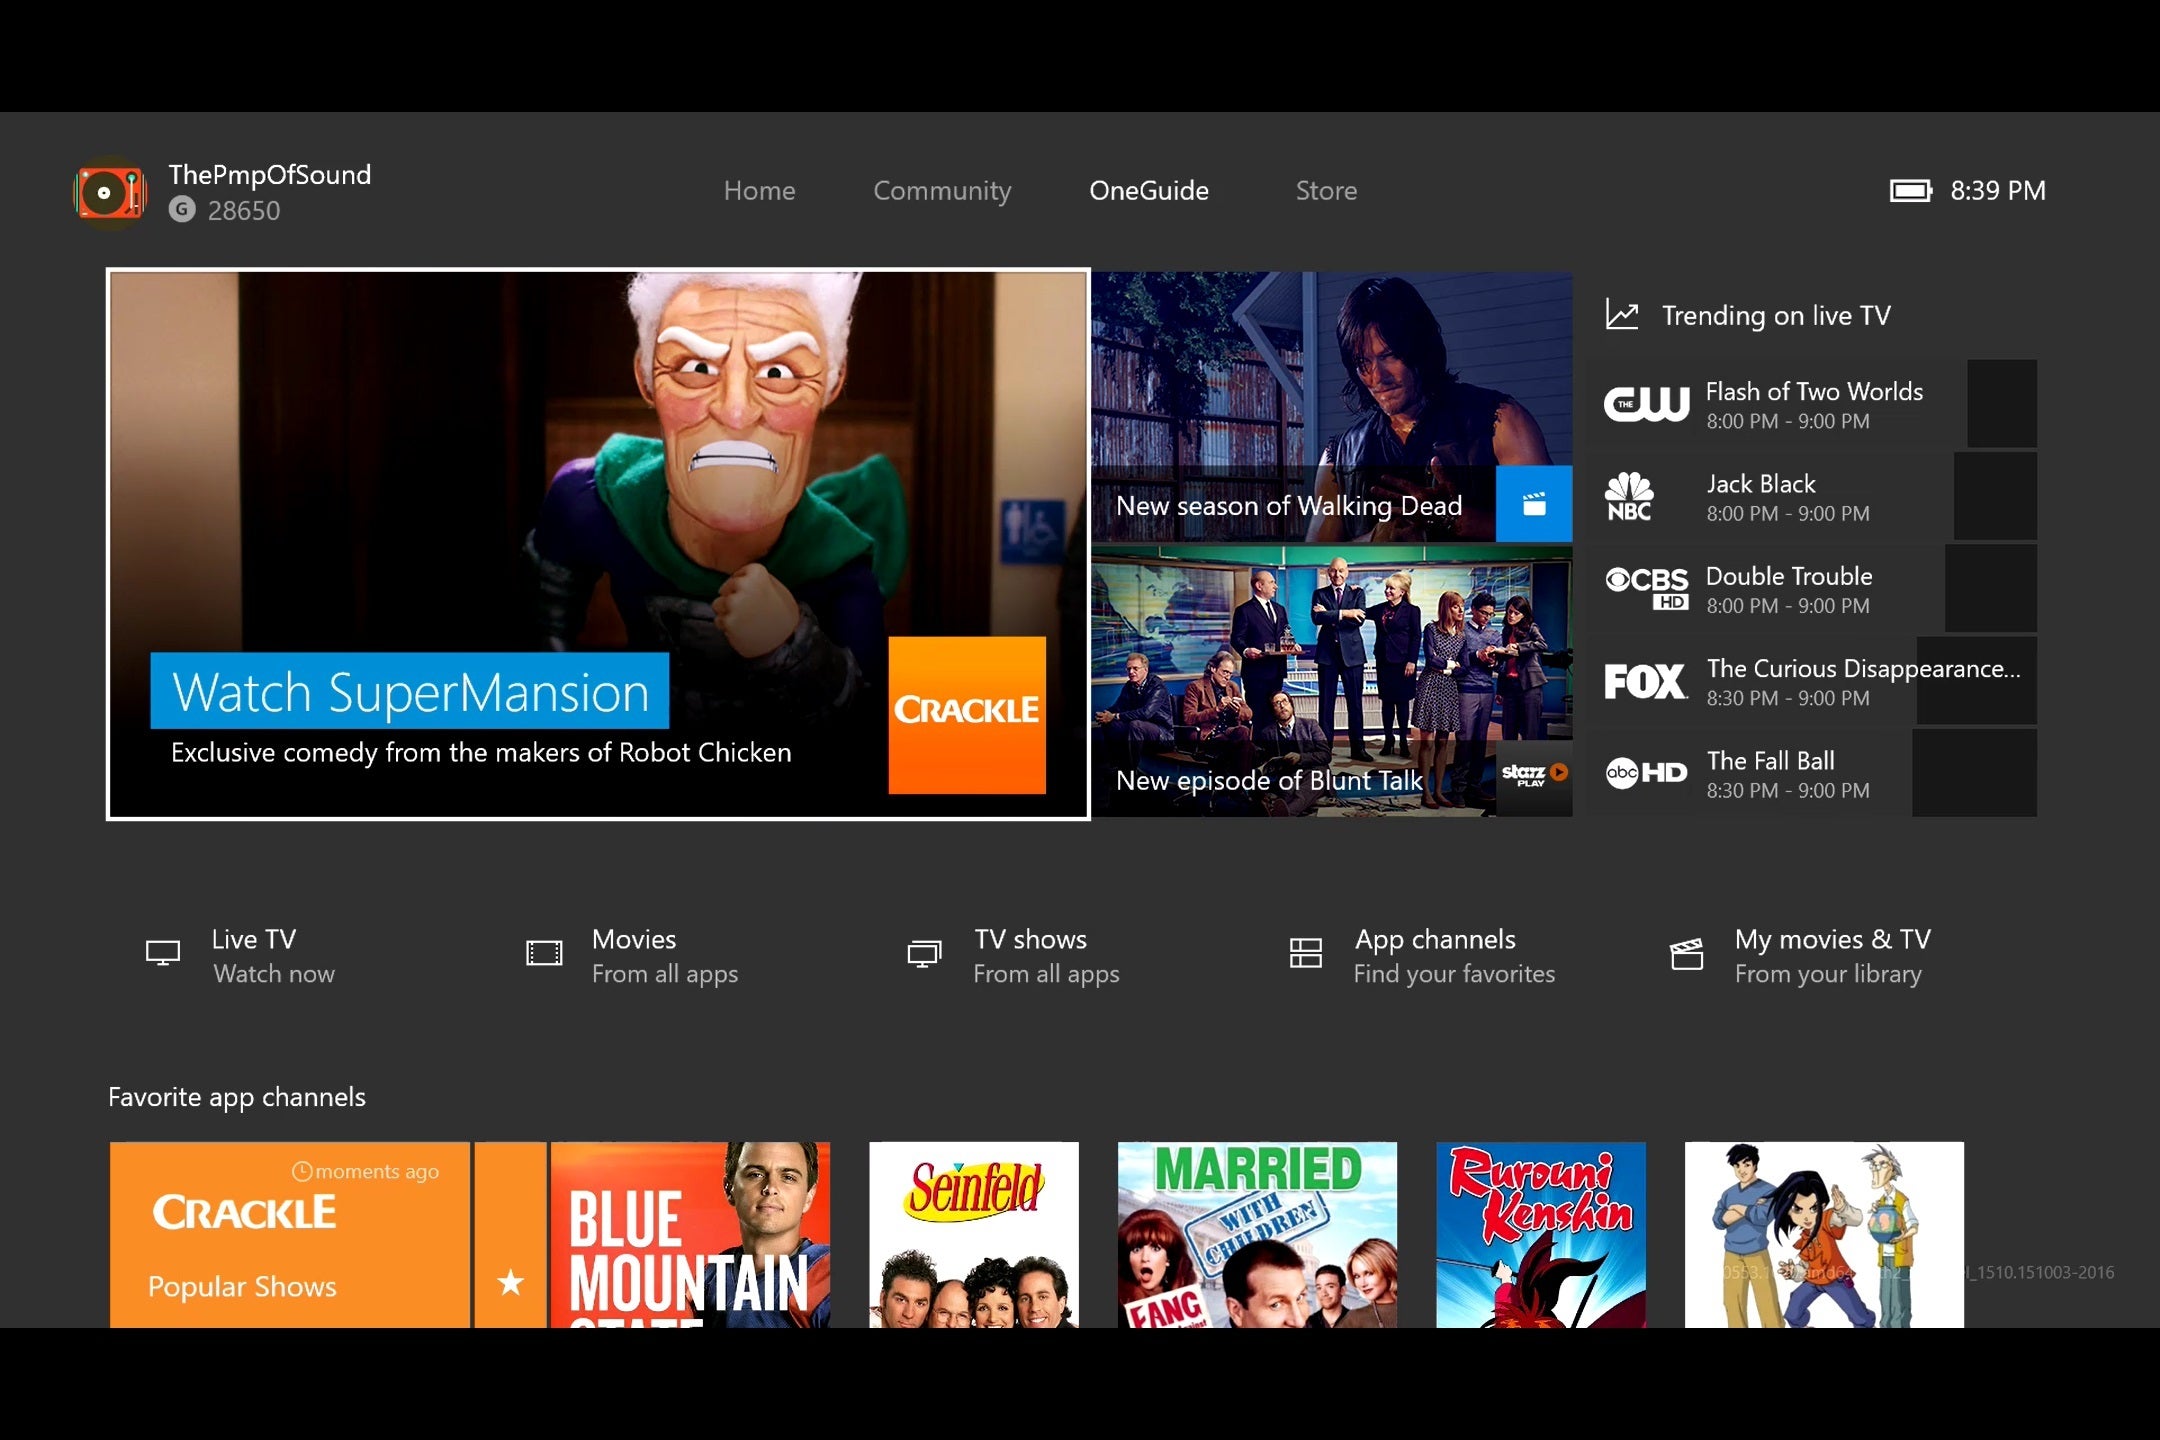 For cord cutters, the Xbox One's new interface tries too hard | TechHive